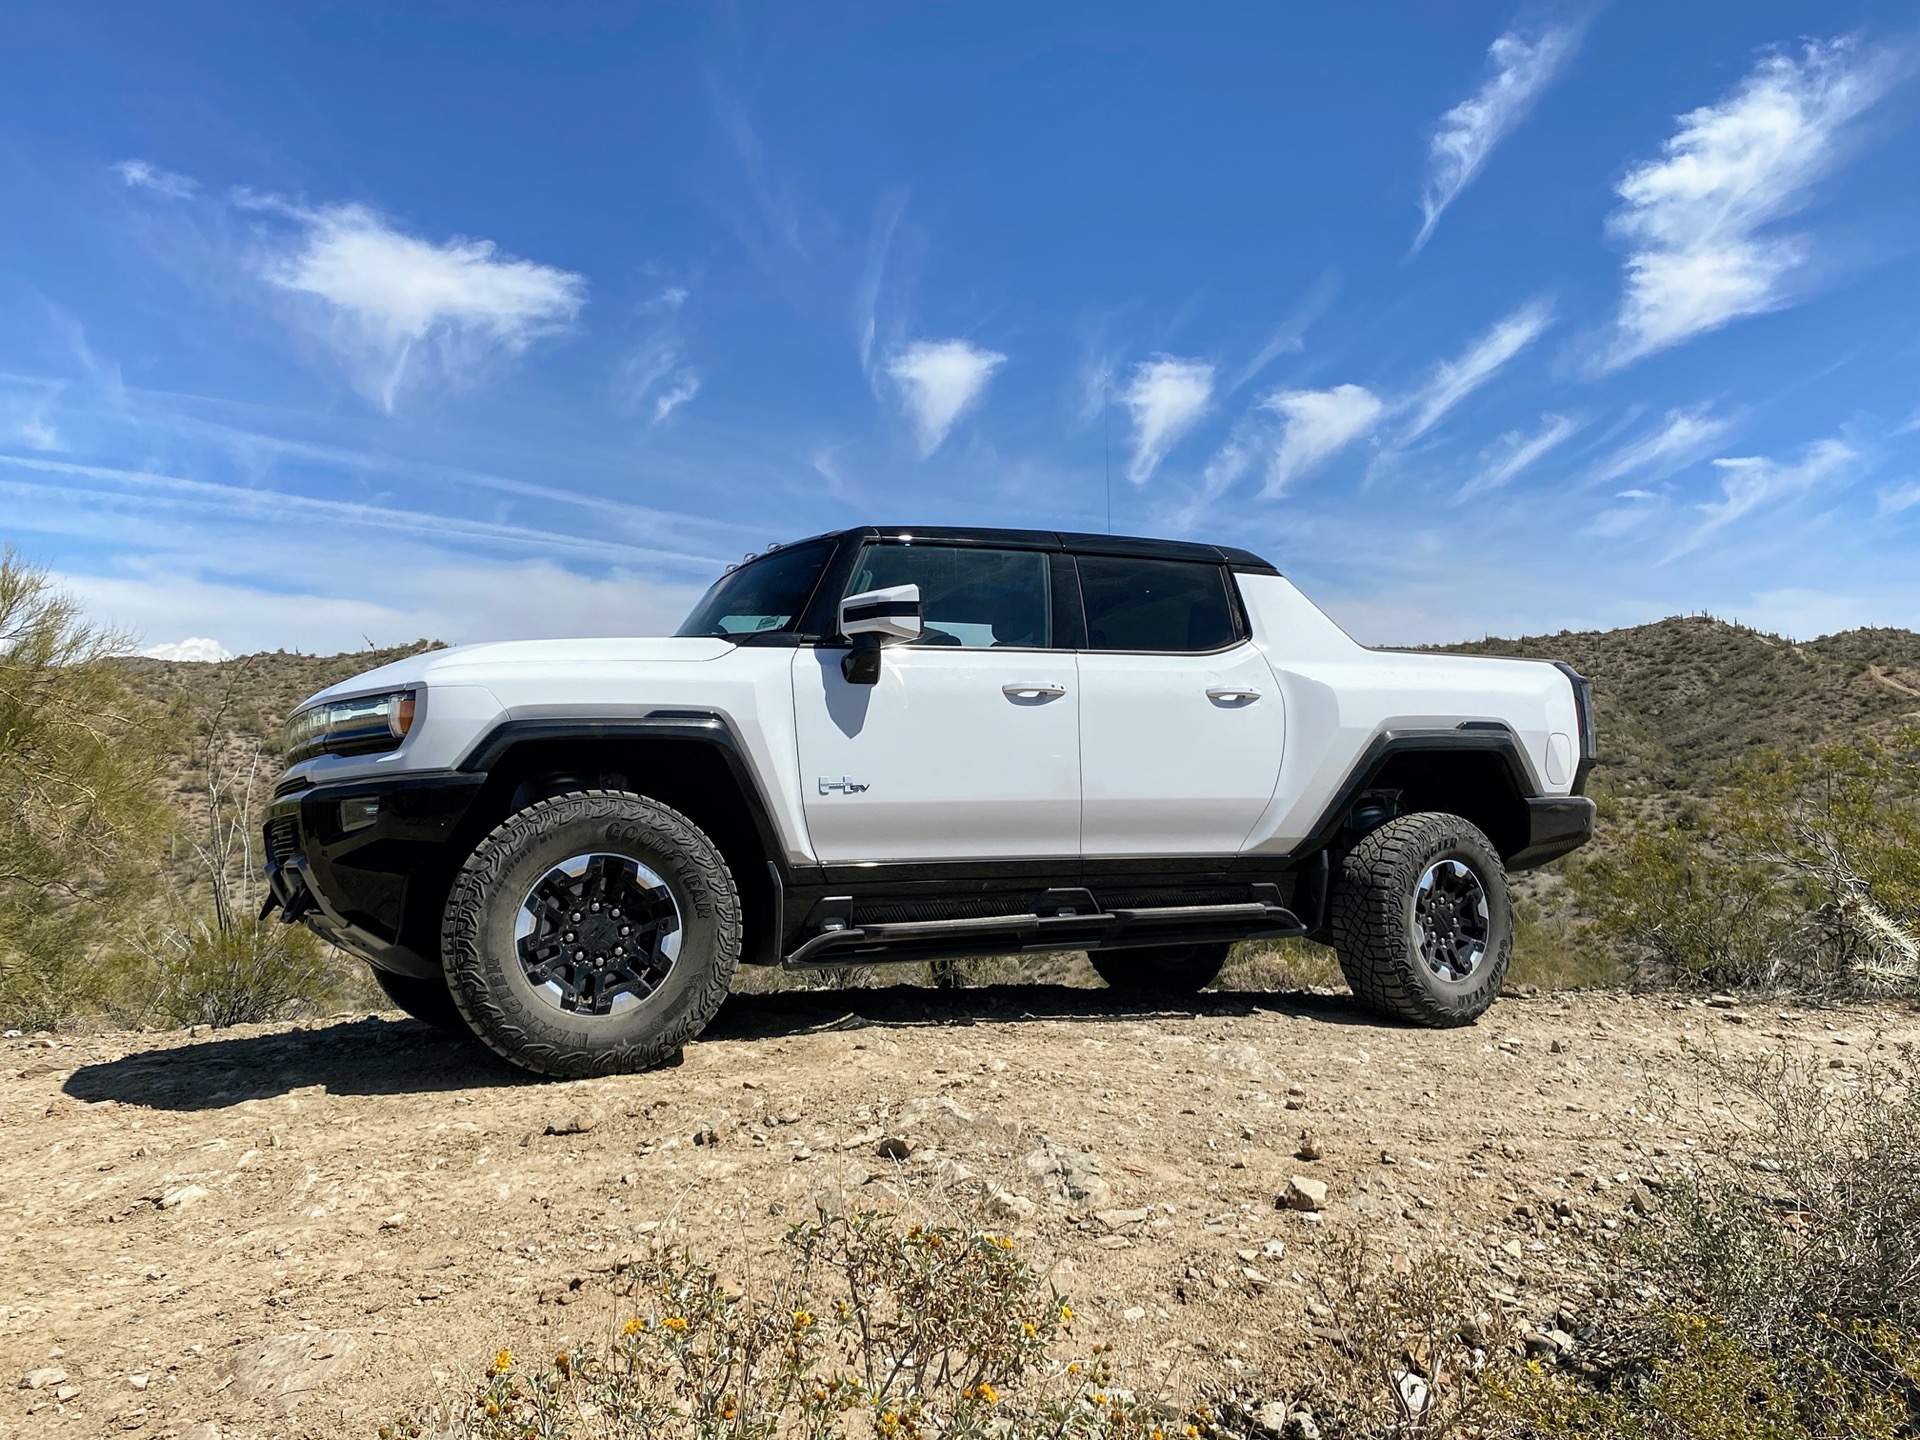 First drive review: 2022 GMC Hummer EV shows how electric off-roading can be